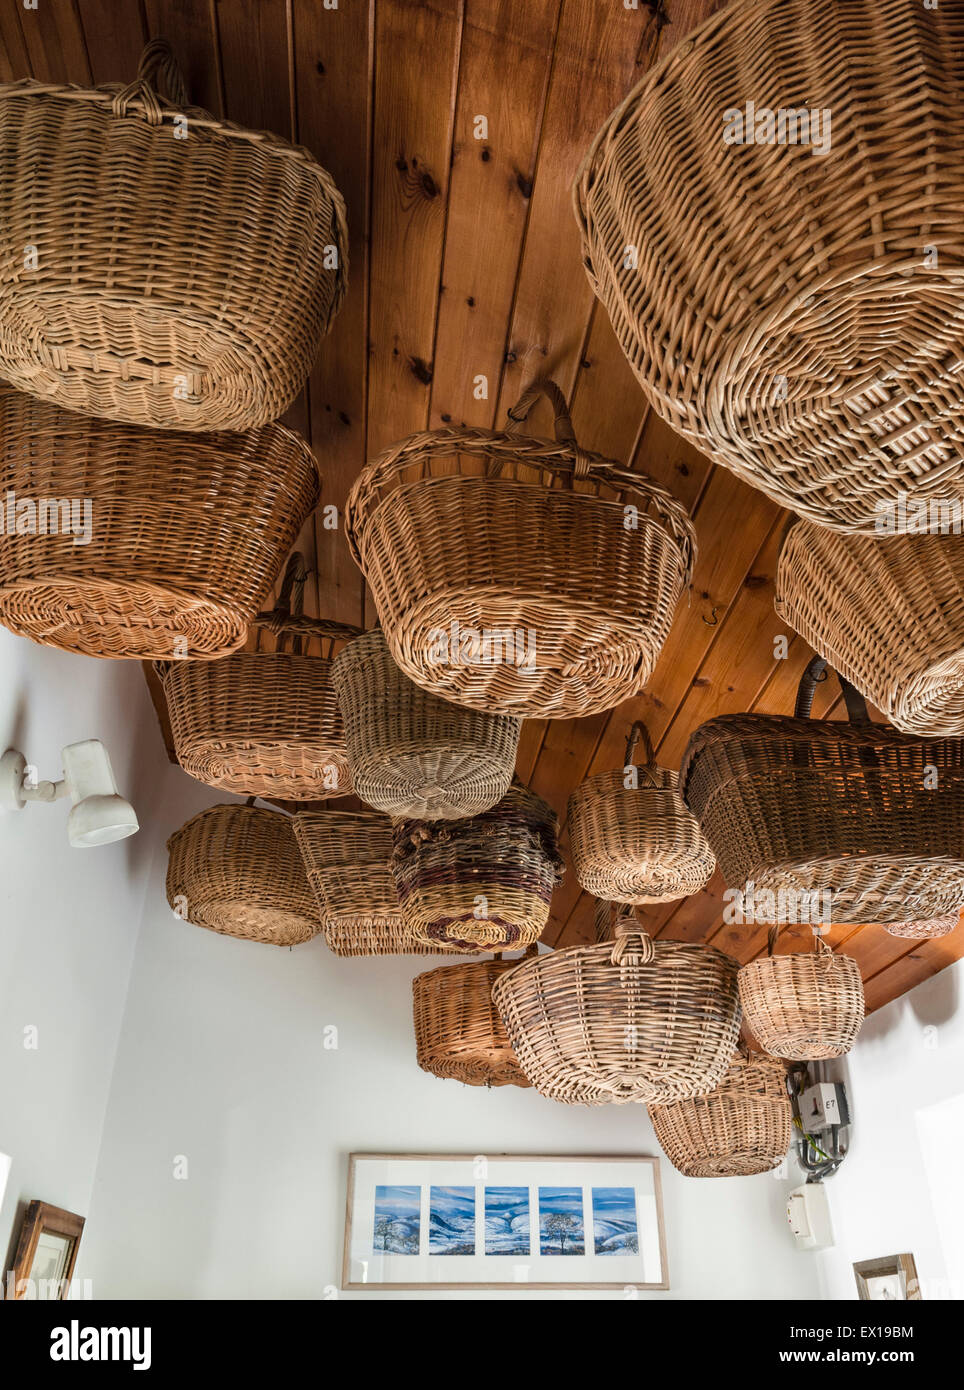 UK. Wicker shopping baskets hung from a ceiling make an attractive decorative feature Stock Photo